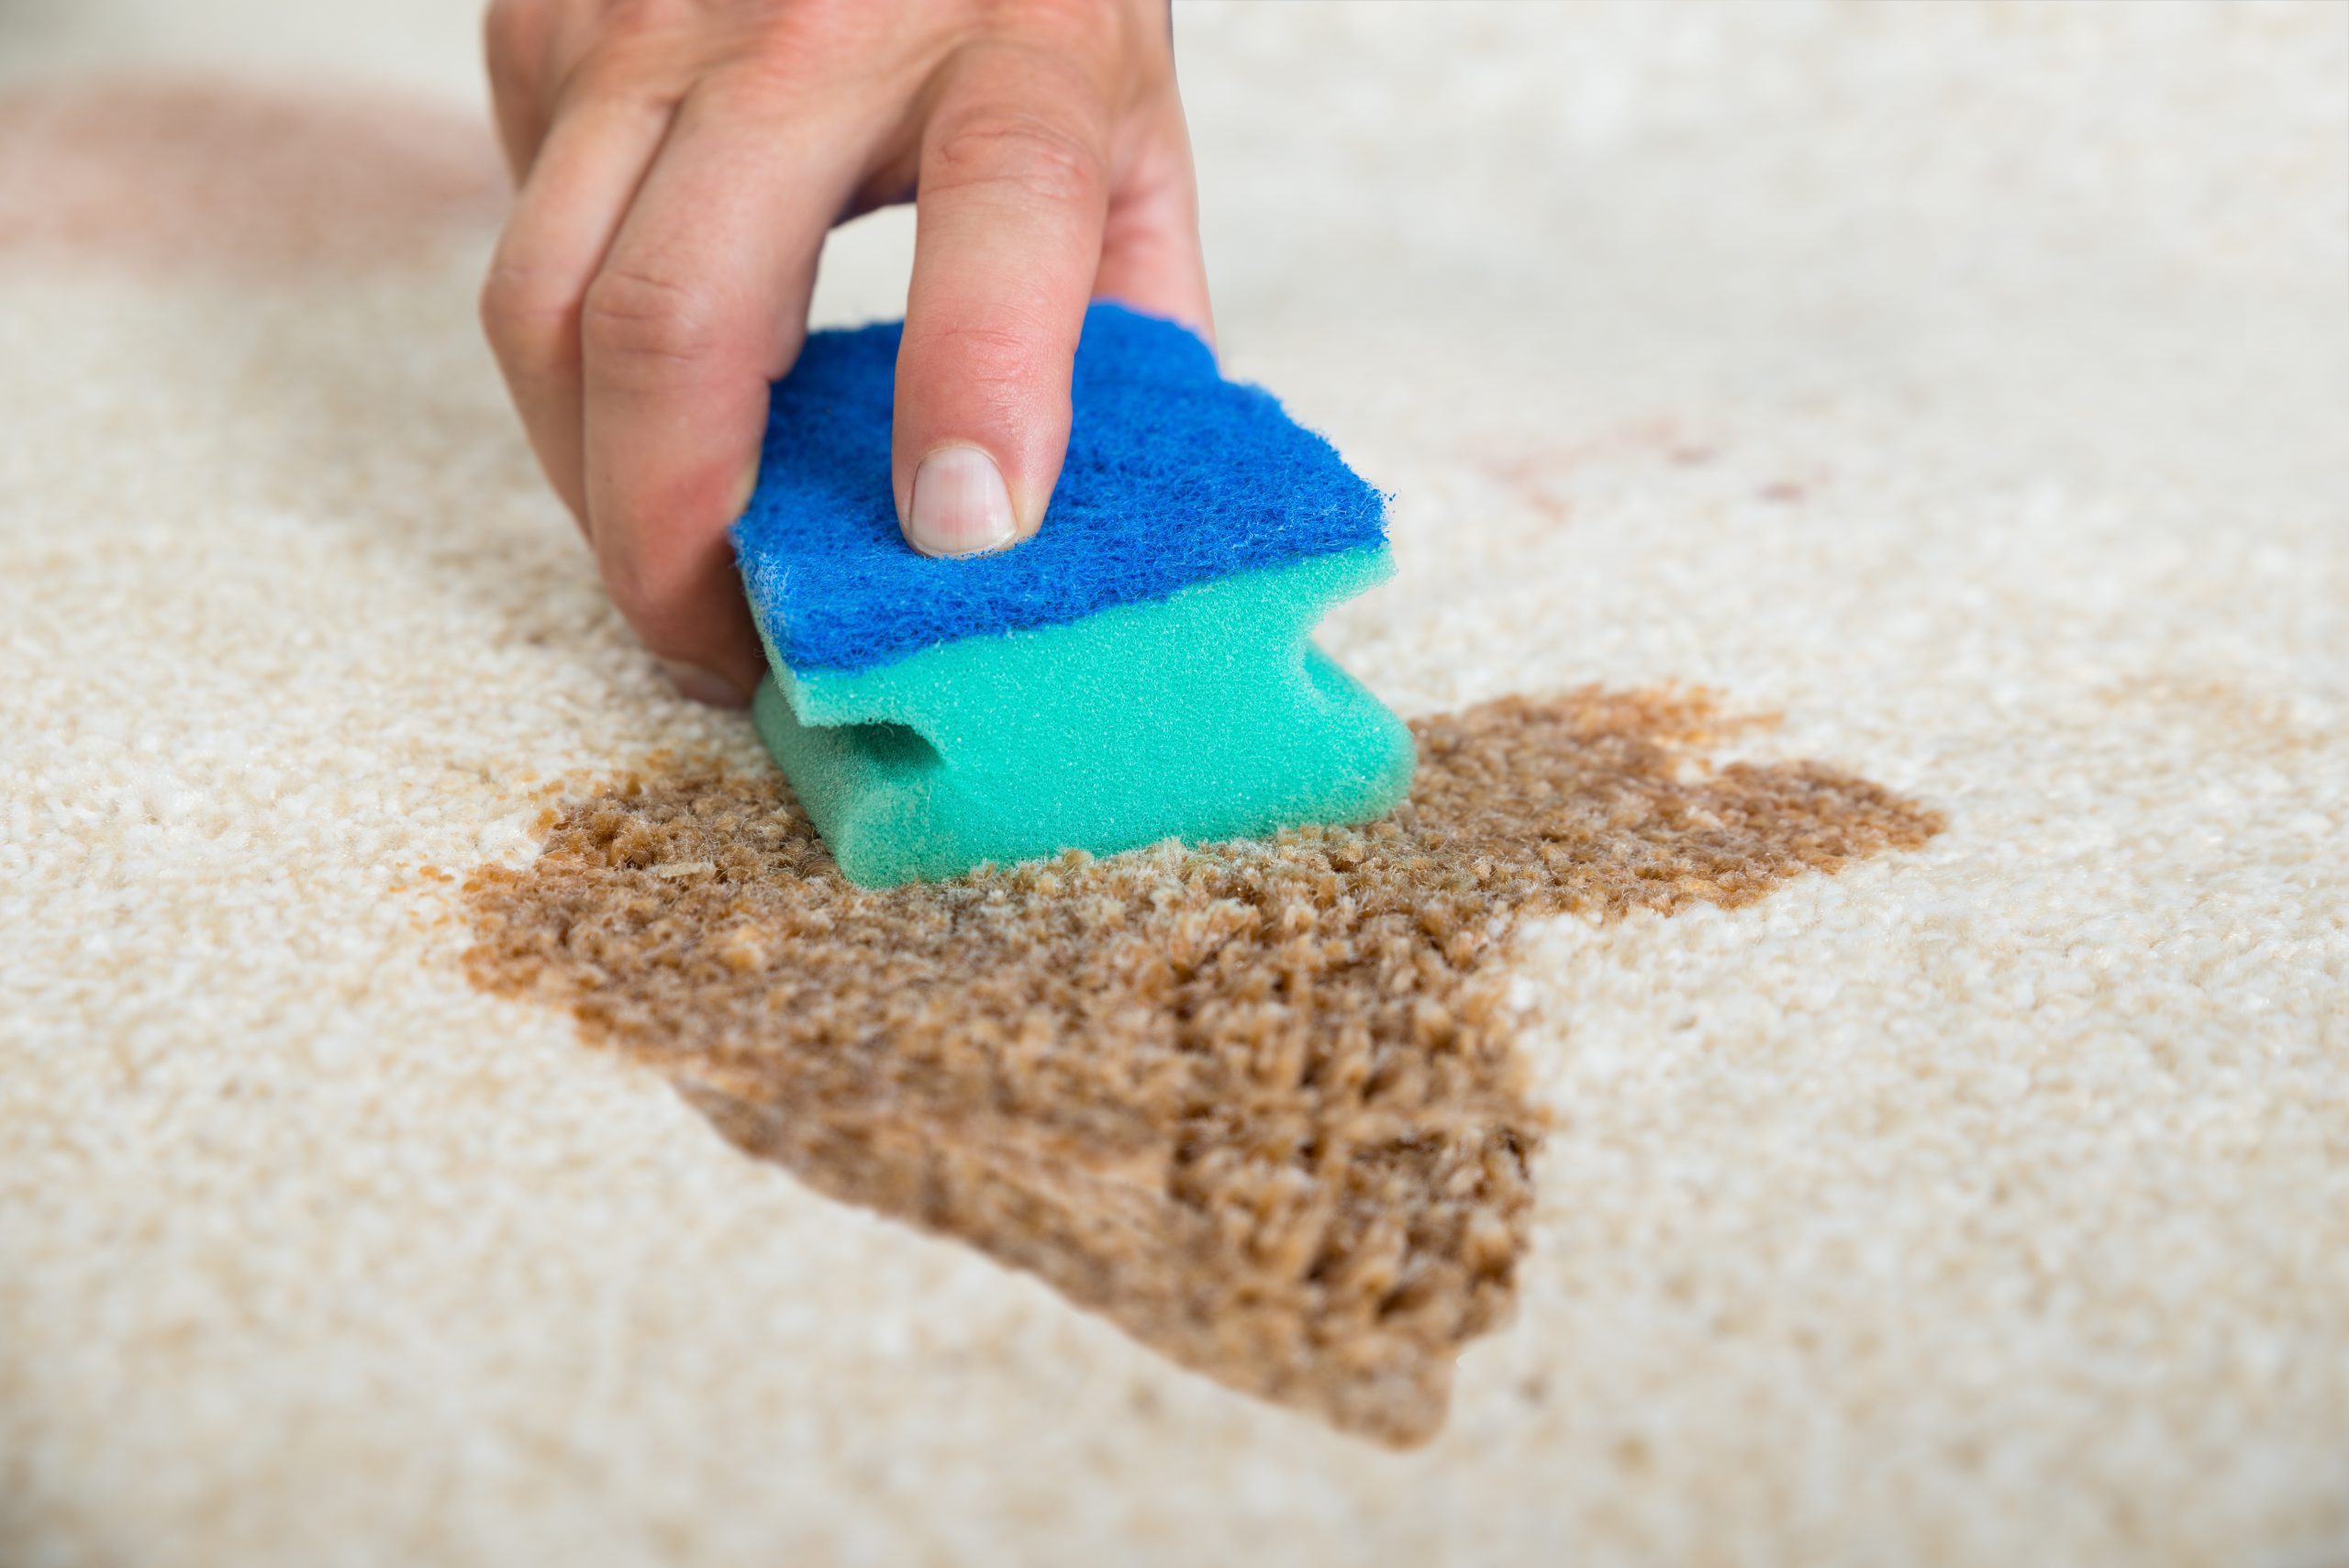 Cleaning carpet stains by blotting with sponge